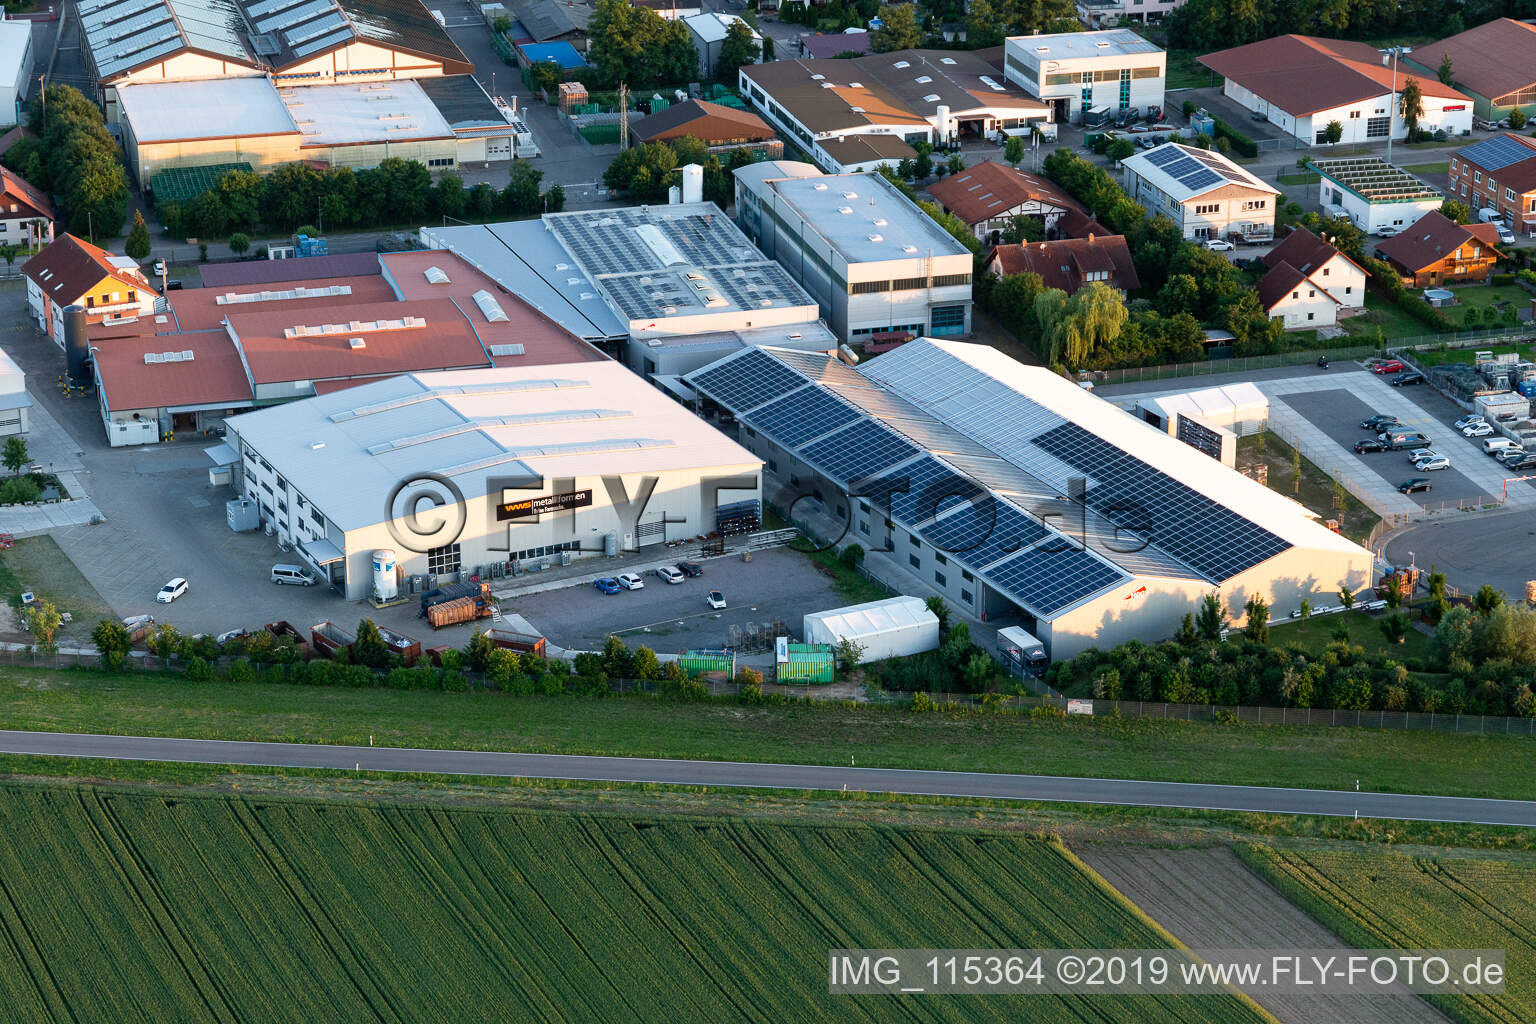 Commercial area Im Gereut, HGGS LaserCUT GmbH & Co. KG in Hatzenbühl in the state Rhineland-Palatinate, Germany from the drone perspective